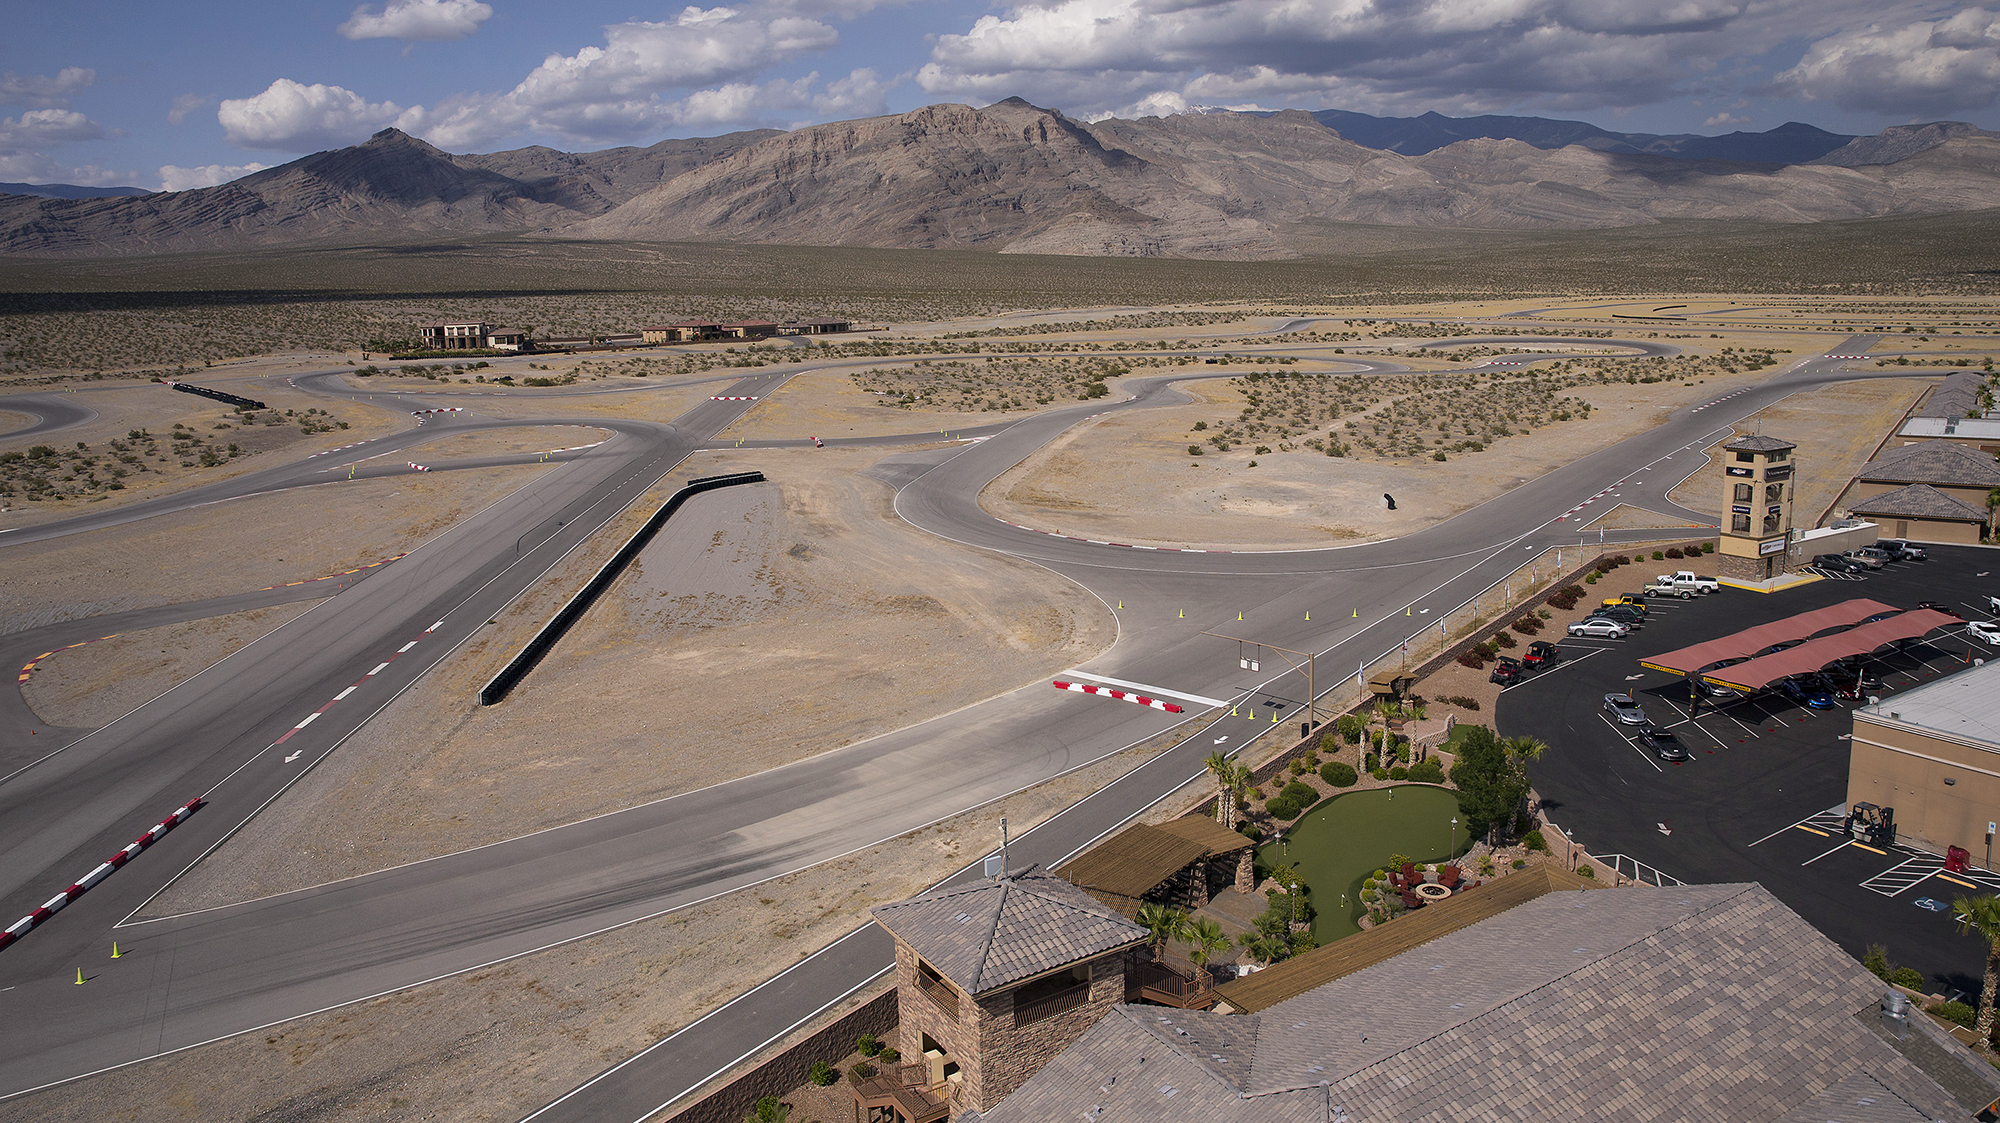 Located 55 miles west of the Las Vegas Strip, Spring Mountain Motor Resort and Country Club boasts the longest road course in North America. With more than six miles of racetrack and 50 unique configurations, Spring Mountain Motor Resort and Country Club enables V-Performance Academy drivers to extract maximum performance from V-Series vehicles.